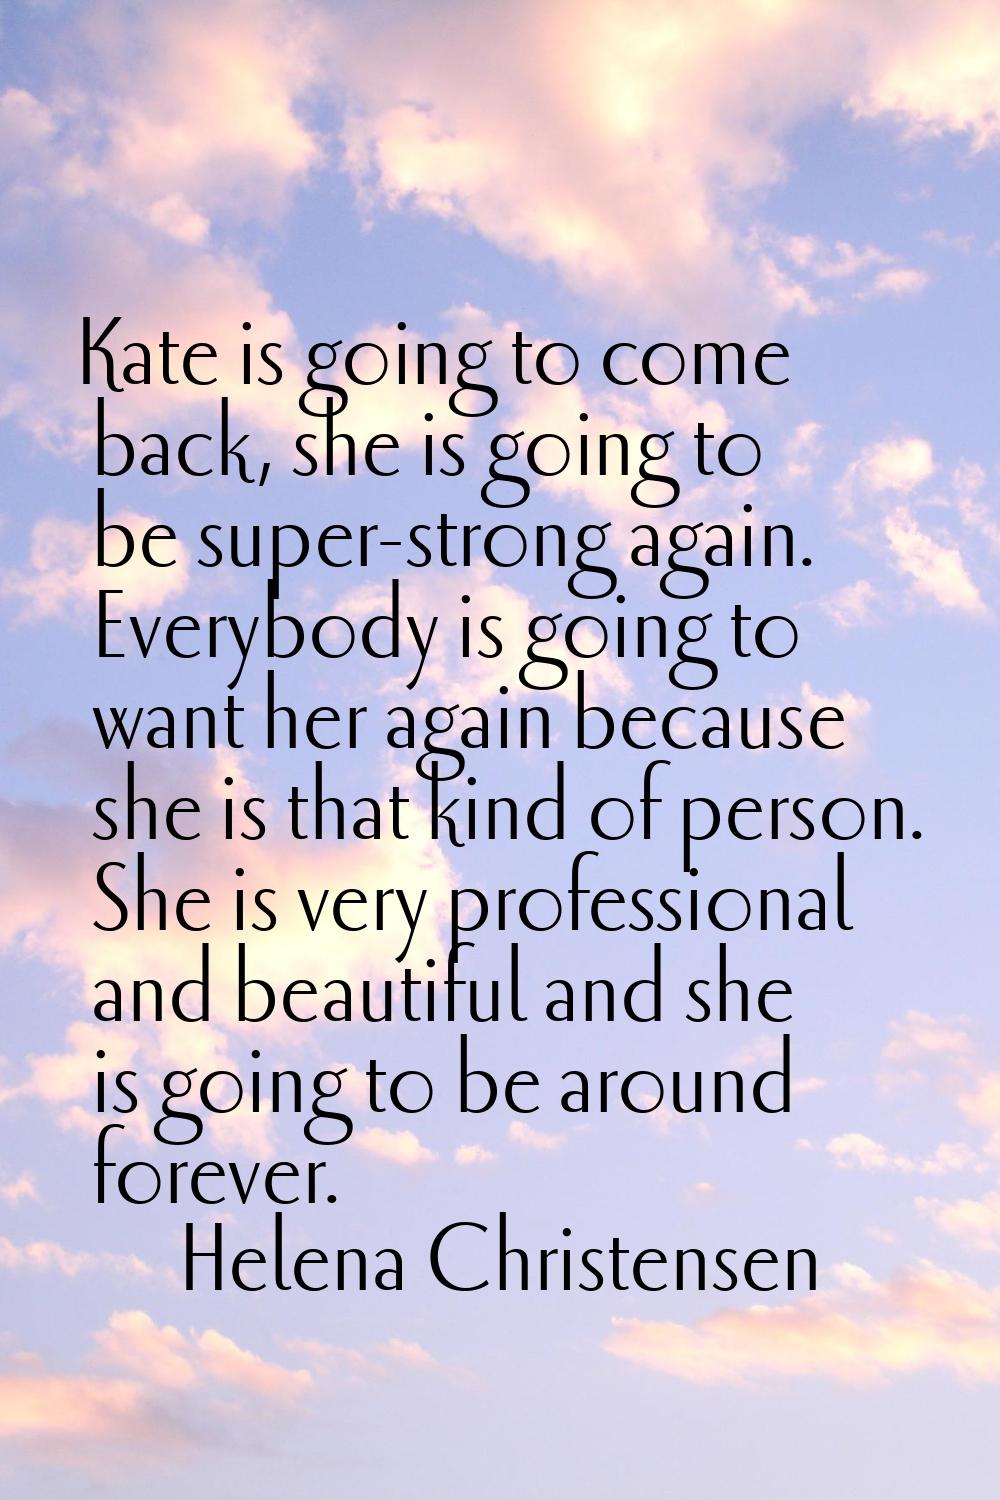 Kate is going to come back, she is going to be super-strong again. Everybody is going to want her a